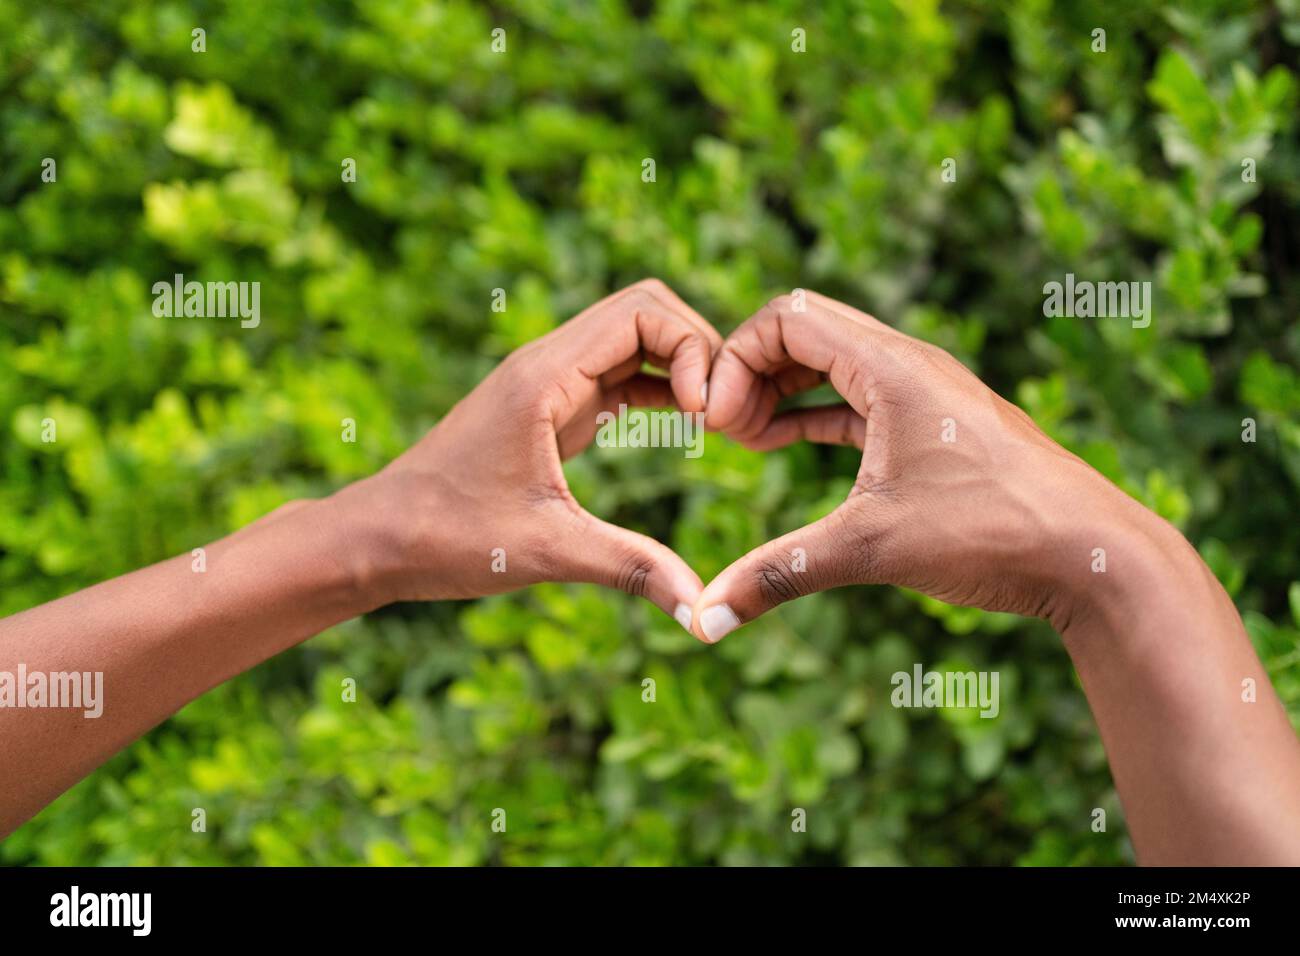 Hands of woman making head shape in front of green plants Stock Photo